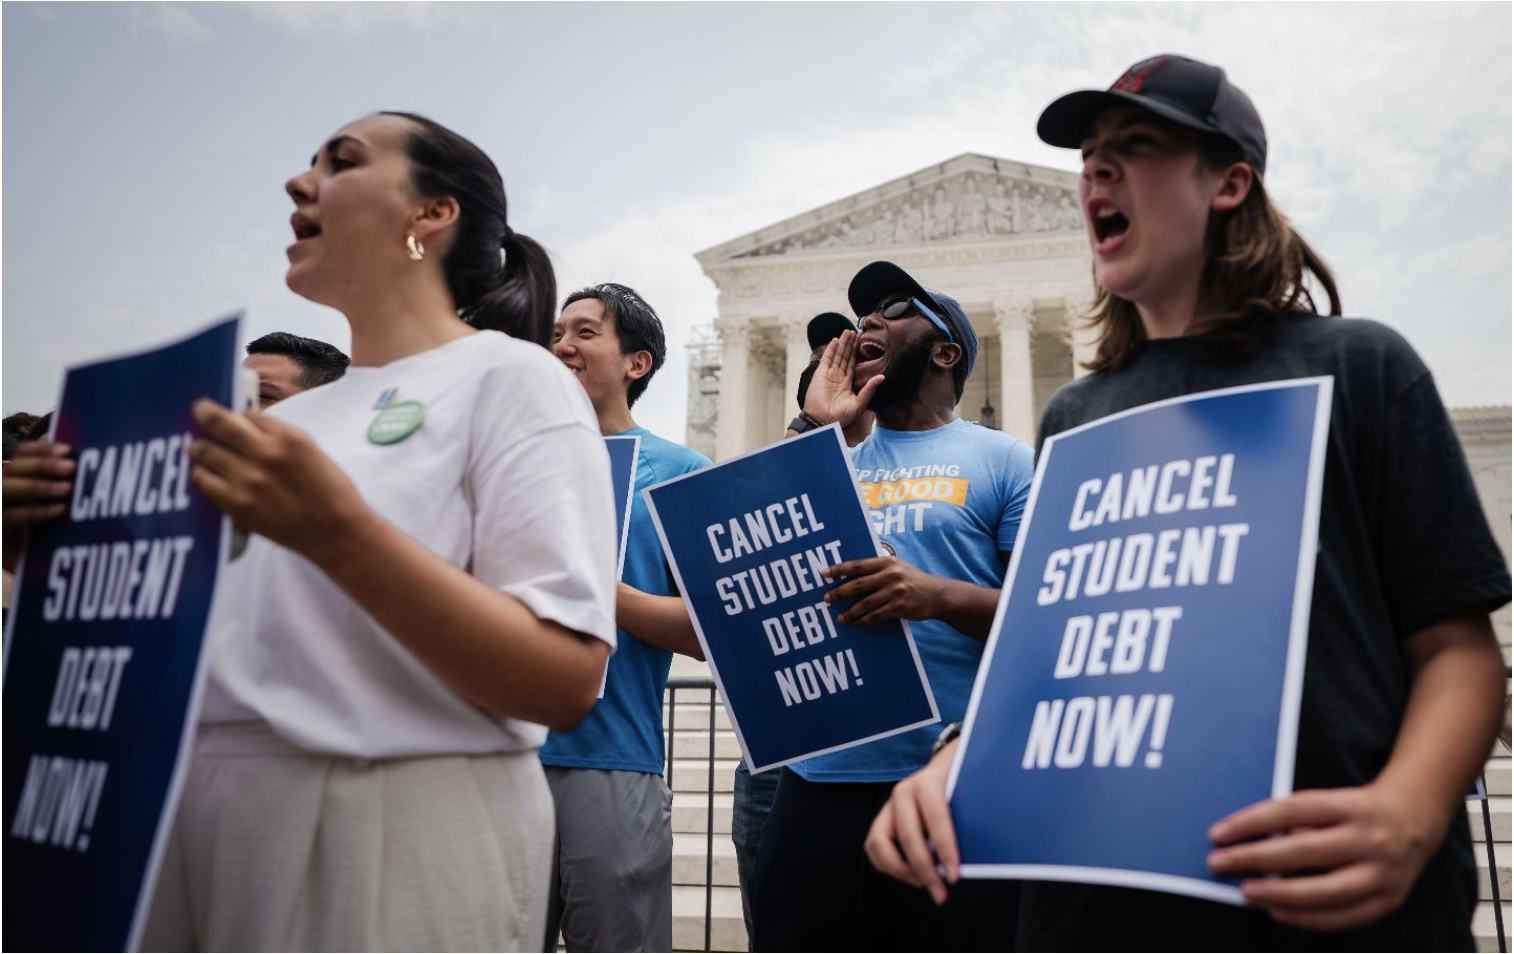 Student Loan Payments Have Resumed, but the Fight for Cancellation Isn’t Over